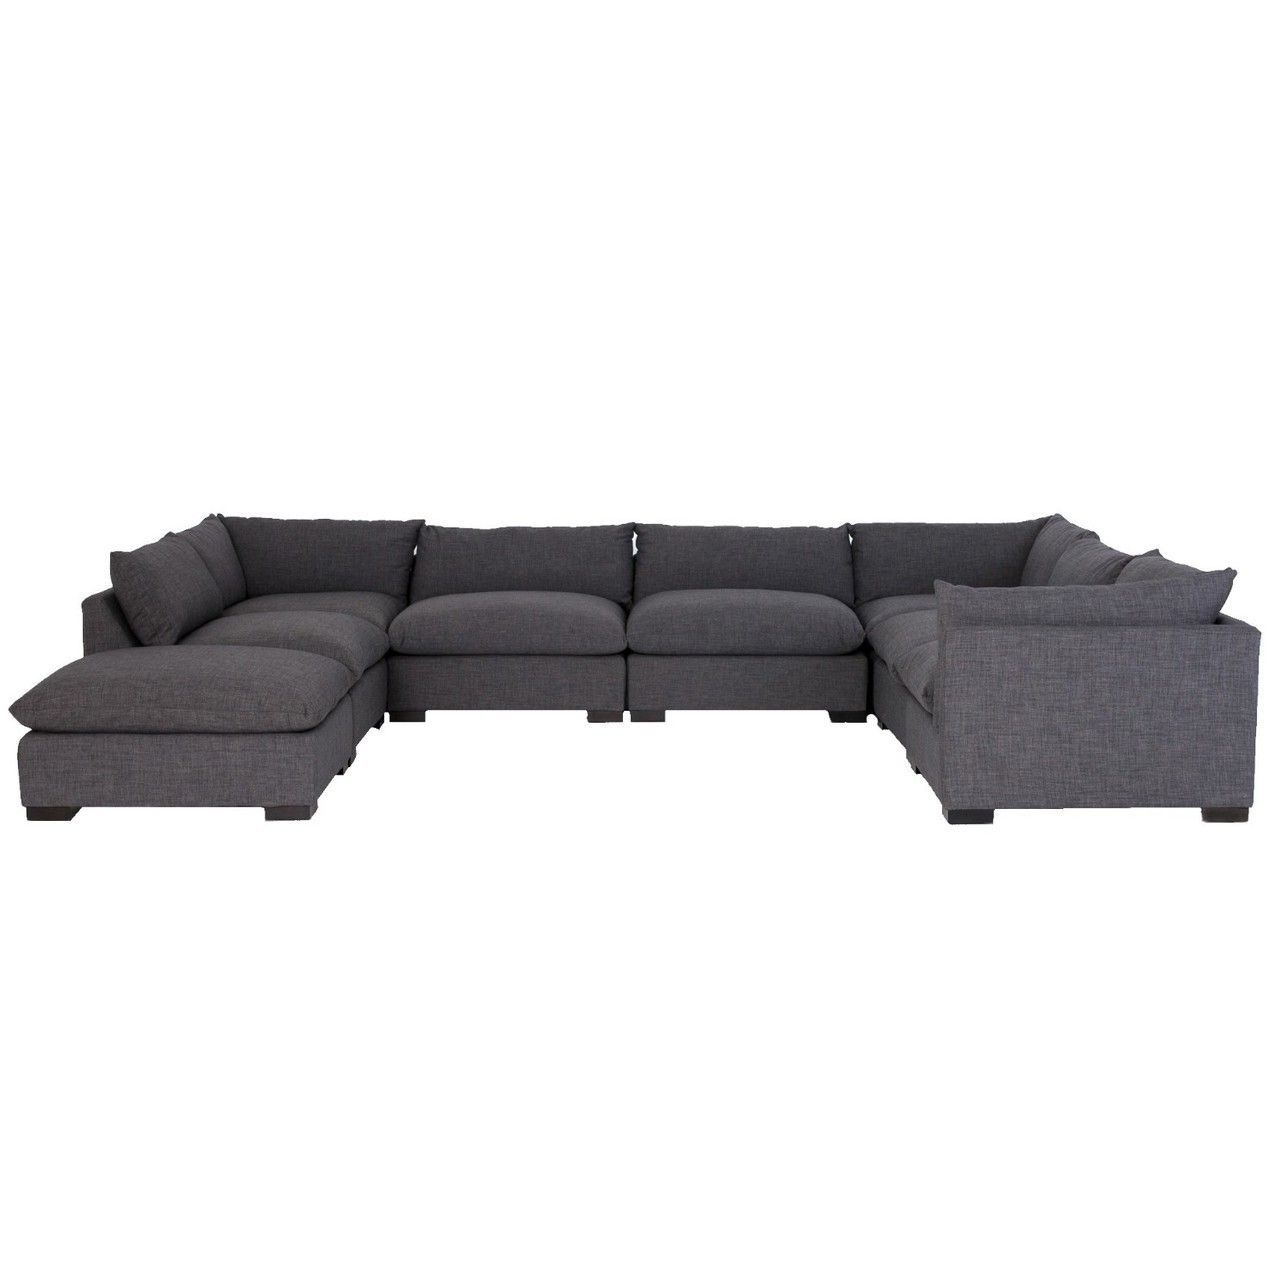 Westworld Modern Gray 8 Piece U Shape Sectional Sofa 156" | Sectional With Regard To Modern U Shape Sectional Sofas In Gray (View 5 of 20)